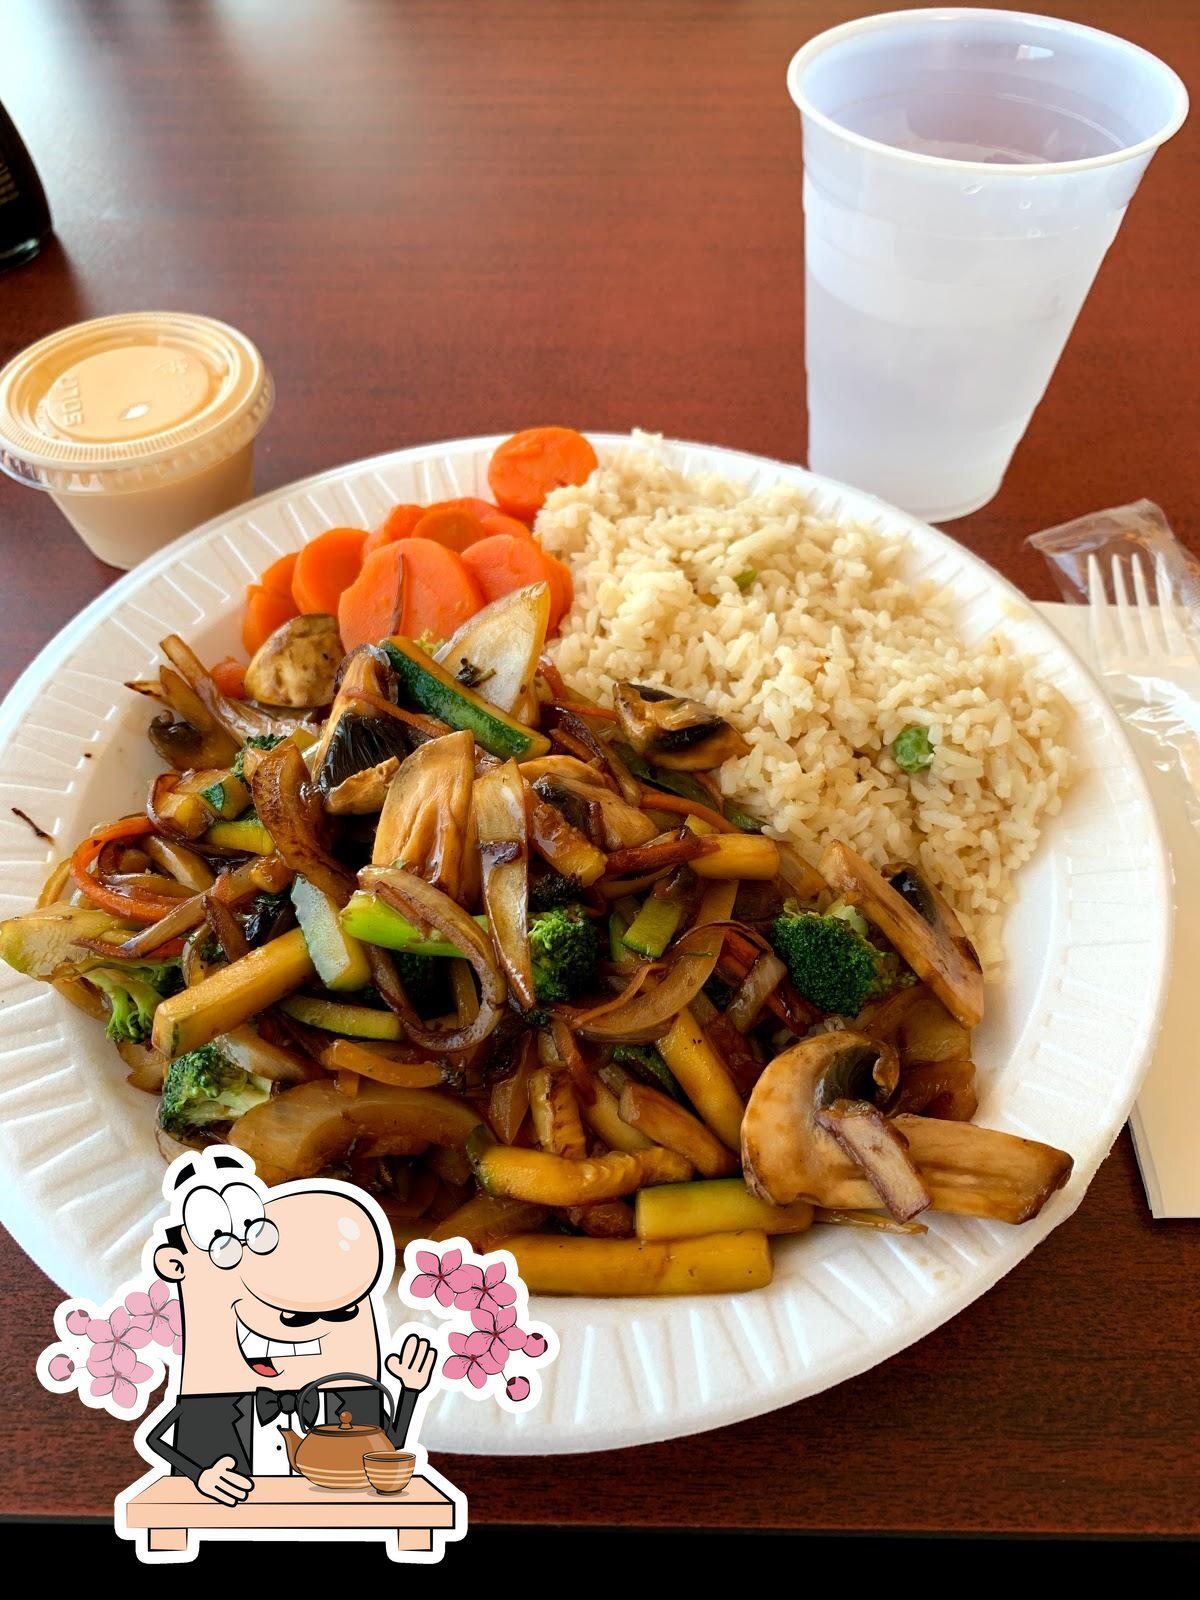 Hoshi Express Japanese Grill In Boiling Springs Restaurant Menu And Reviews